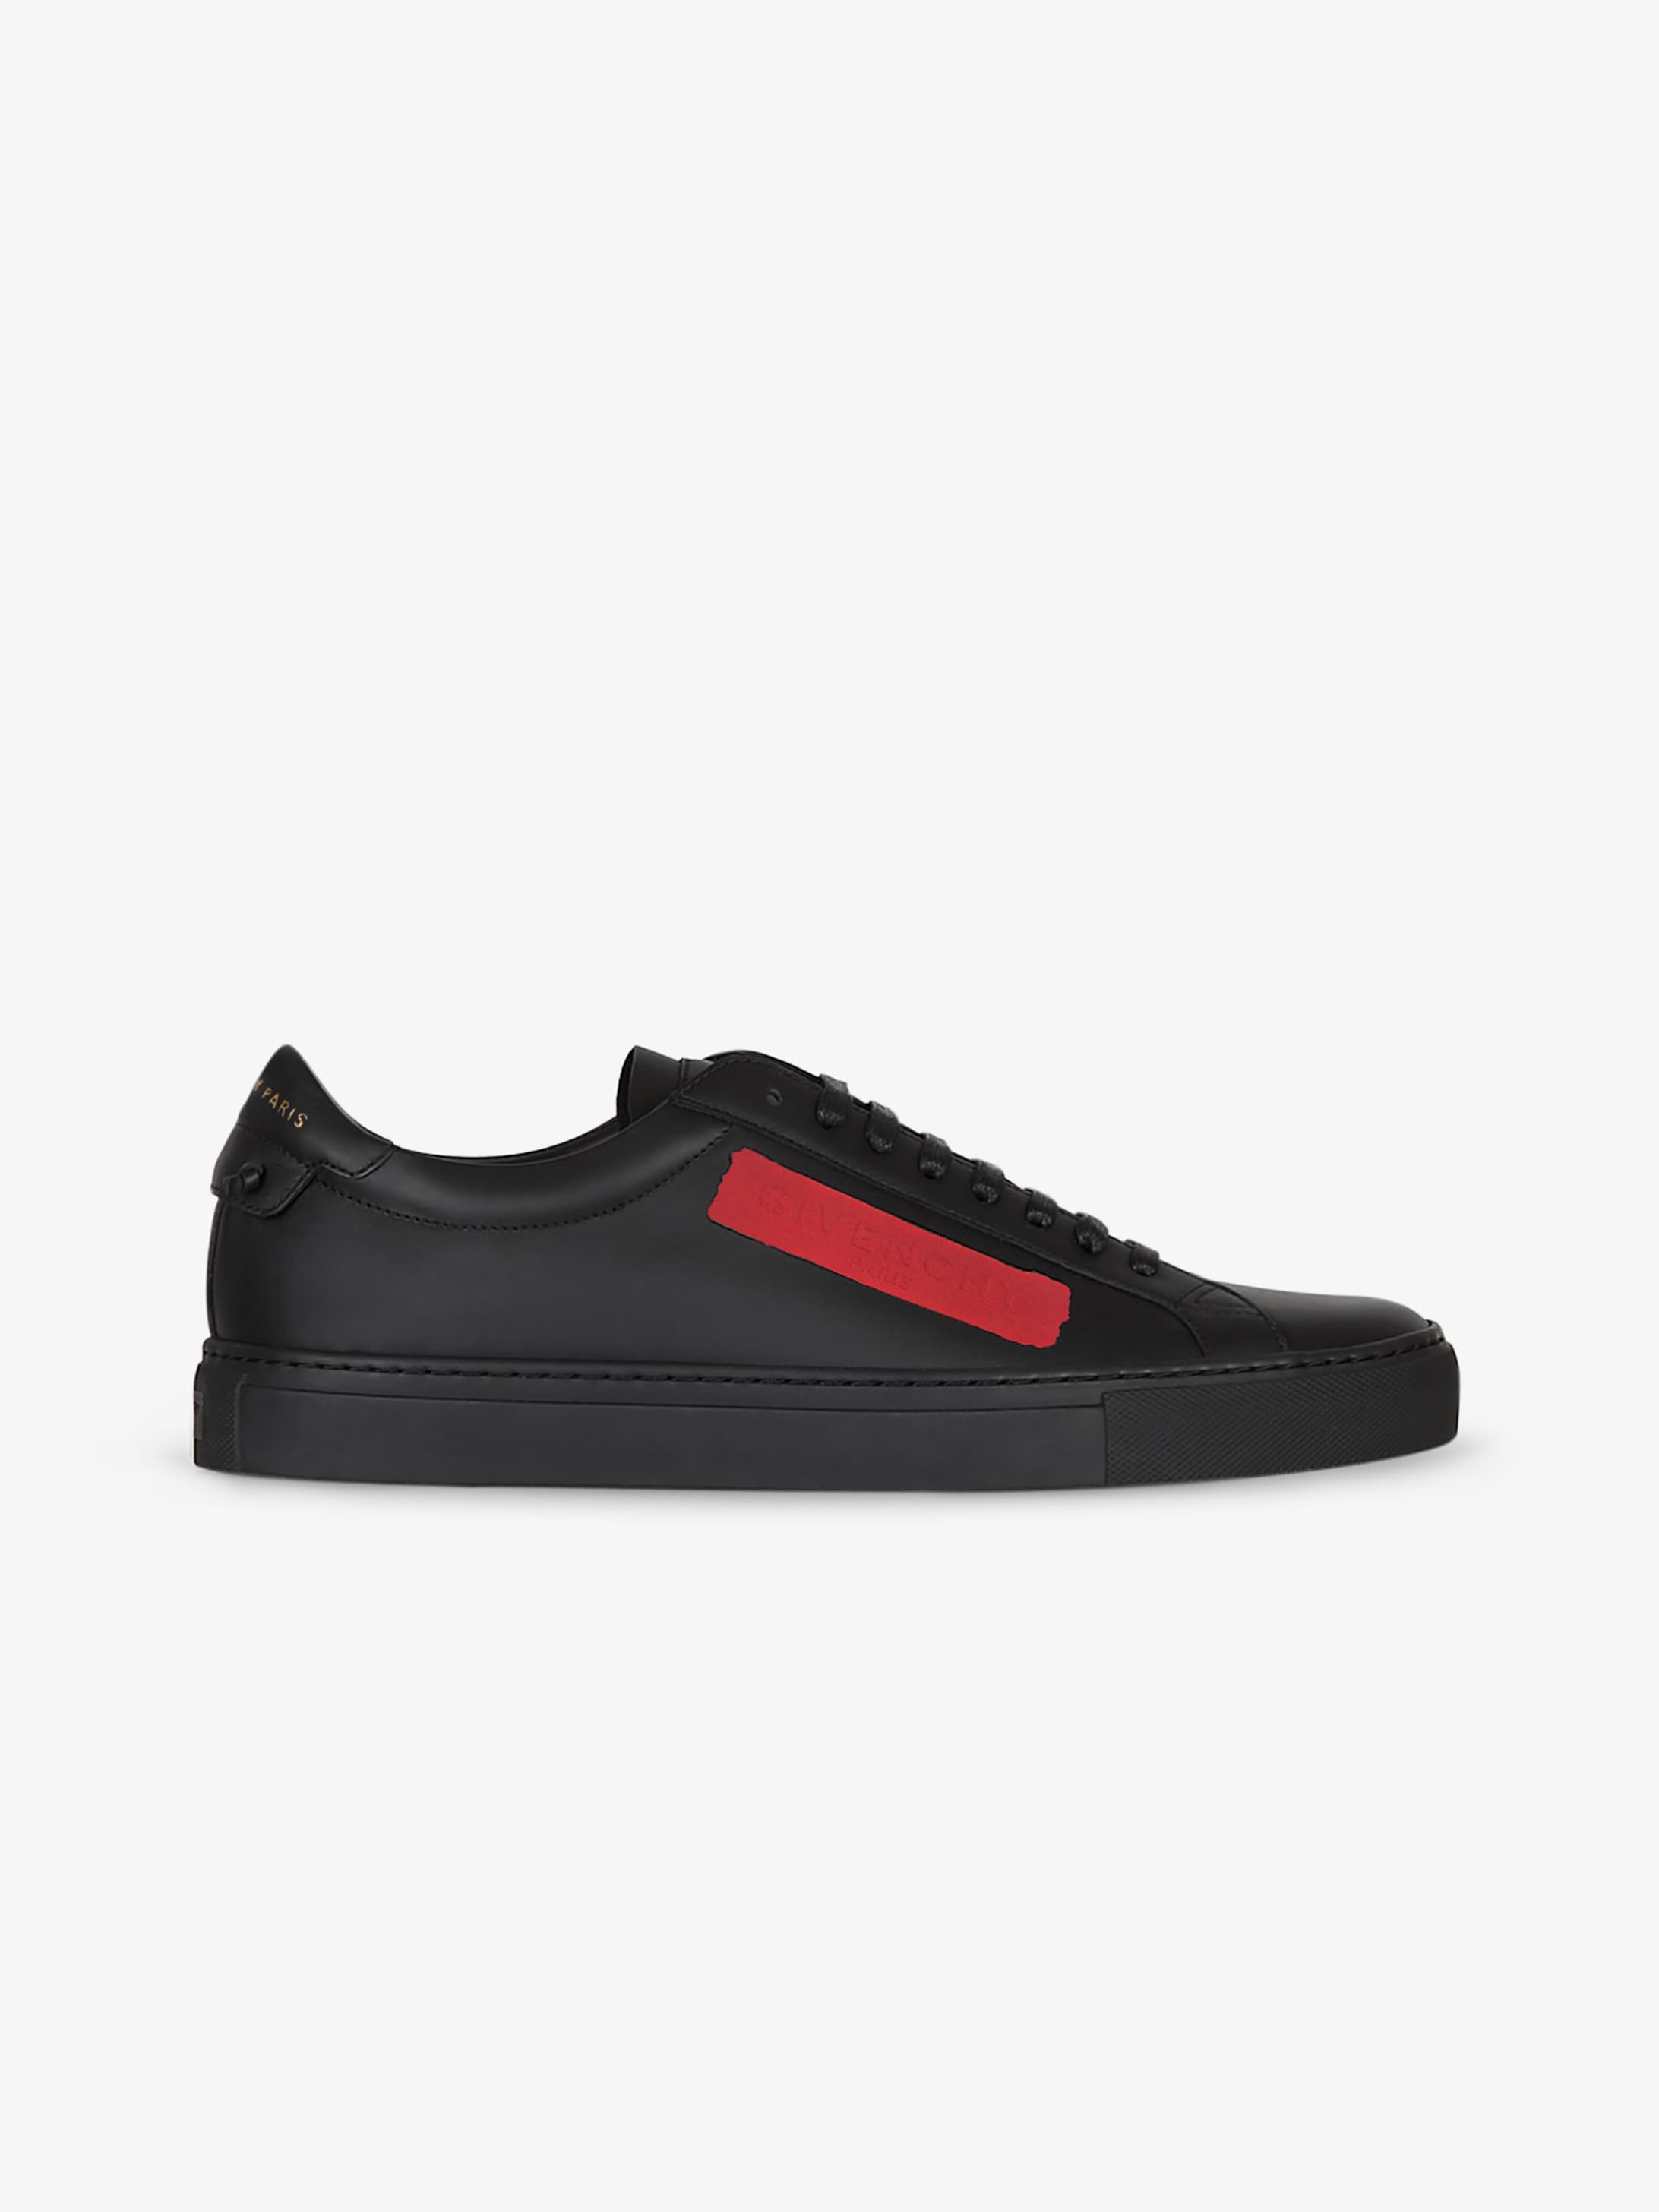 givenchy sneakers uk